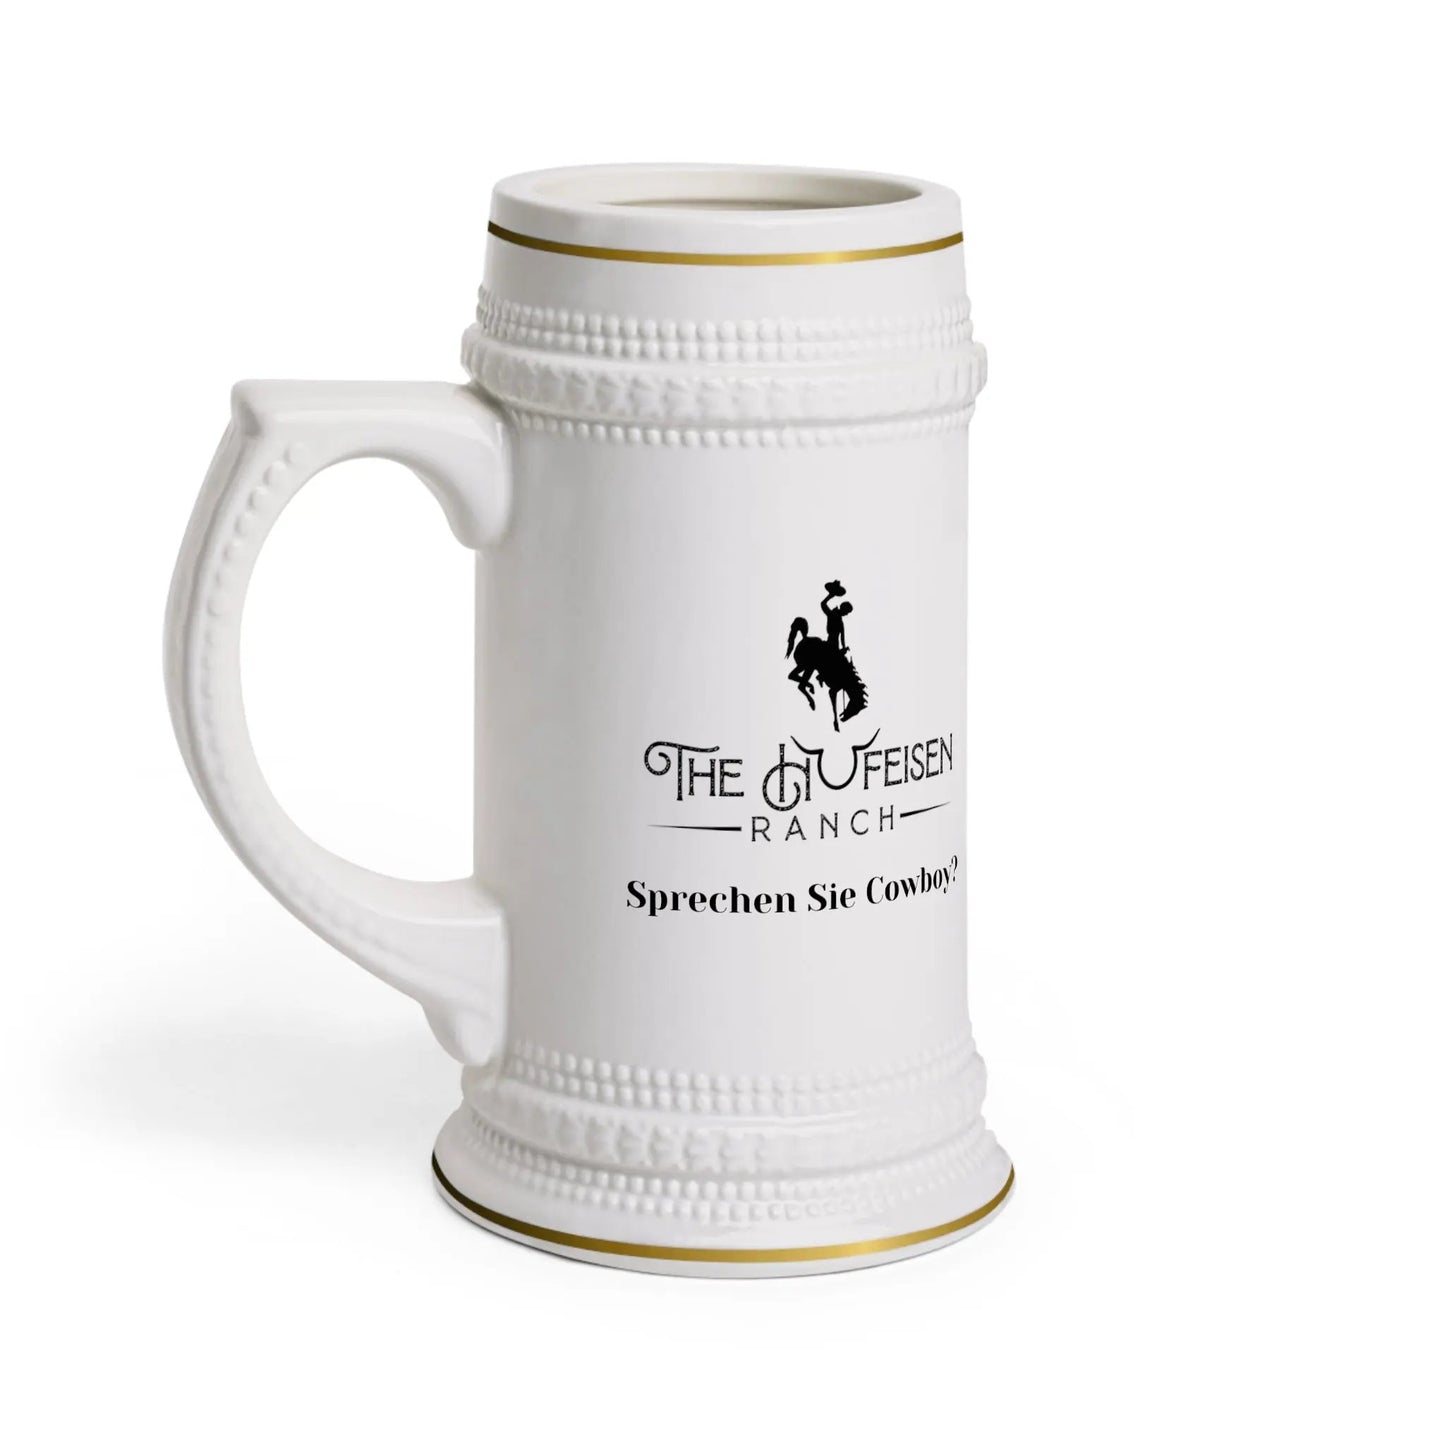 Sprechen Sie Cowboy Beer Stein MugRaise your stein and tip your hat to a unique blend of Old West grit and Bavarian charm with our 'Sprechen Sie Cowboy' Beer Stein. This ruggedly handsome stein bringSprechen Sie Cowboy Beer Stein MugThe Hufeisen-Ranch (WYO Wagyu)Mug